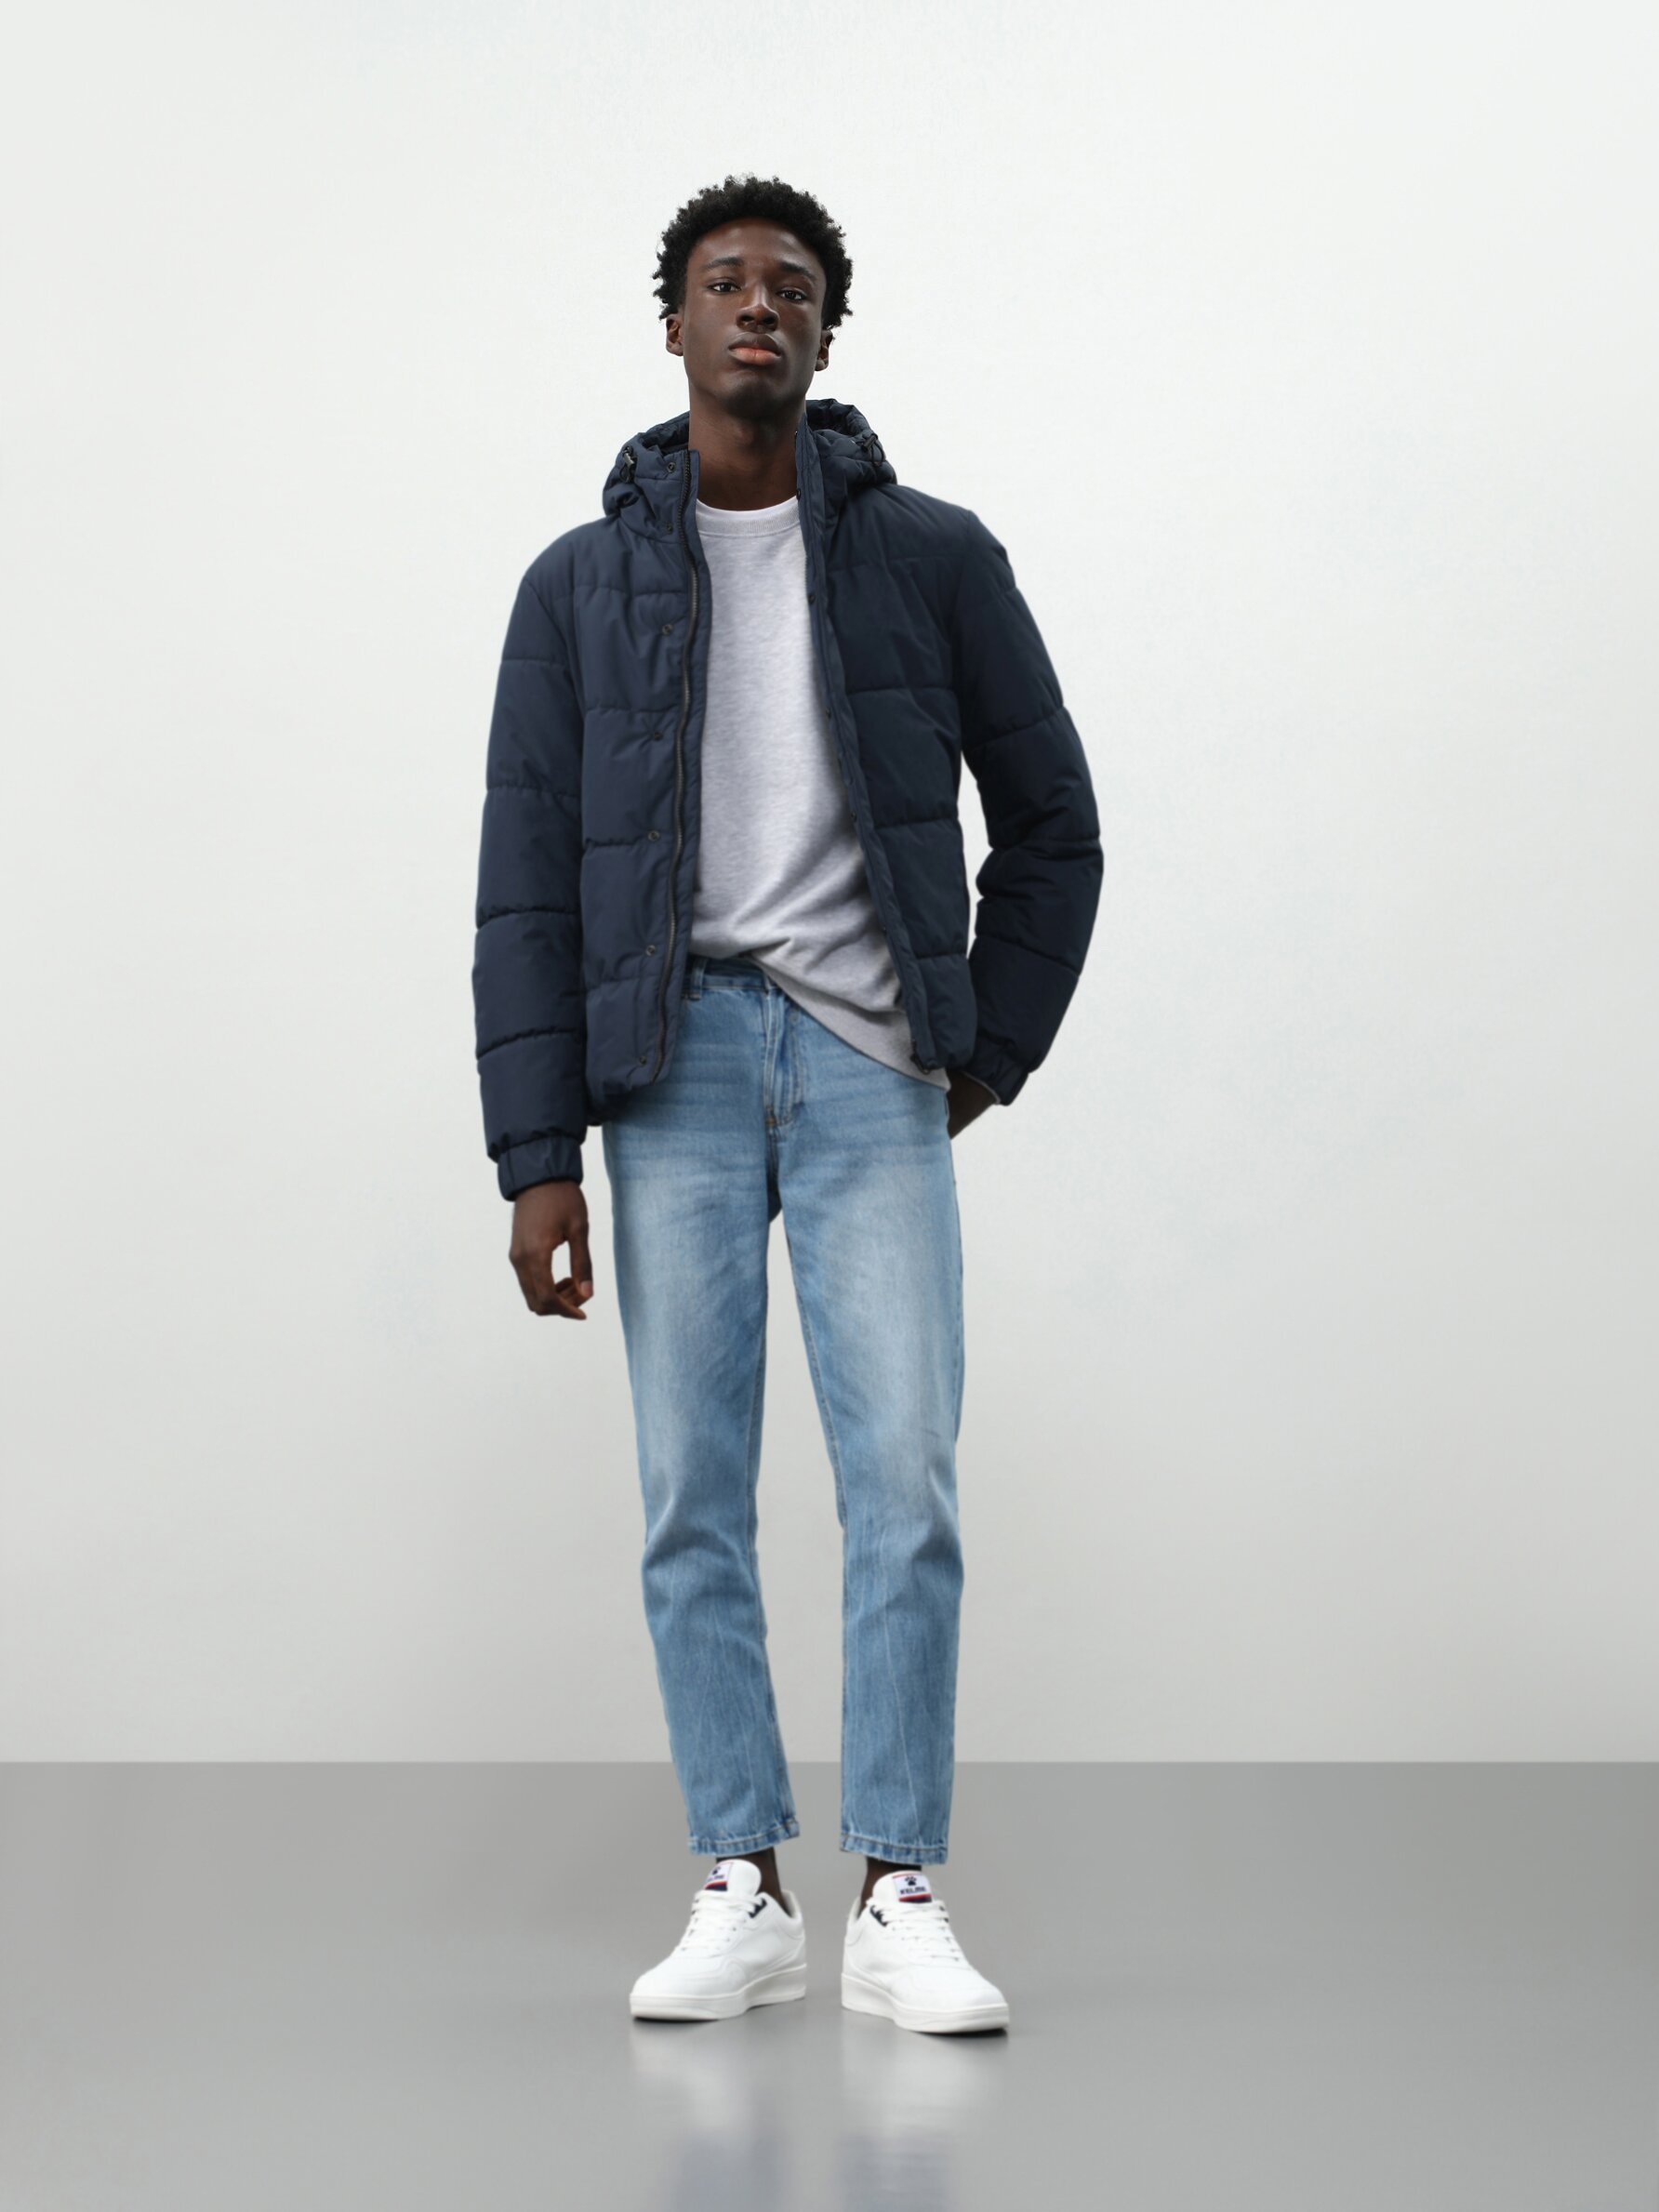 Hooded jacket JACKETS - THE ENTIRE COLLECTION MAN - Lefties Spain (Canary Islands)